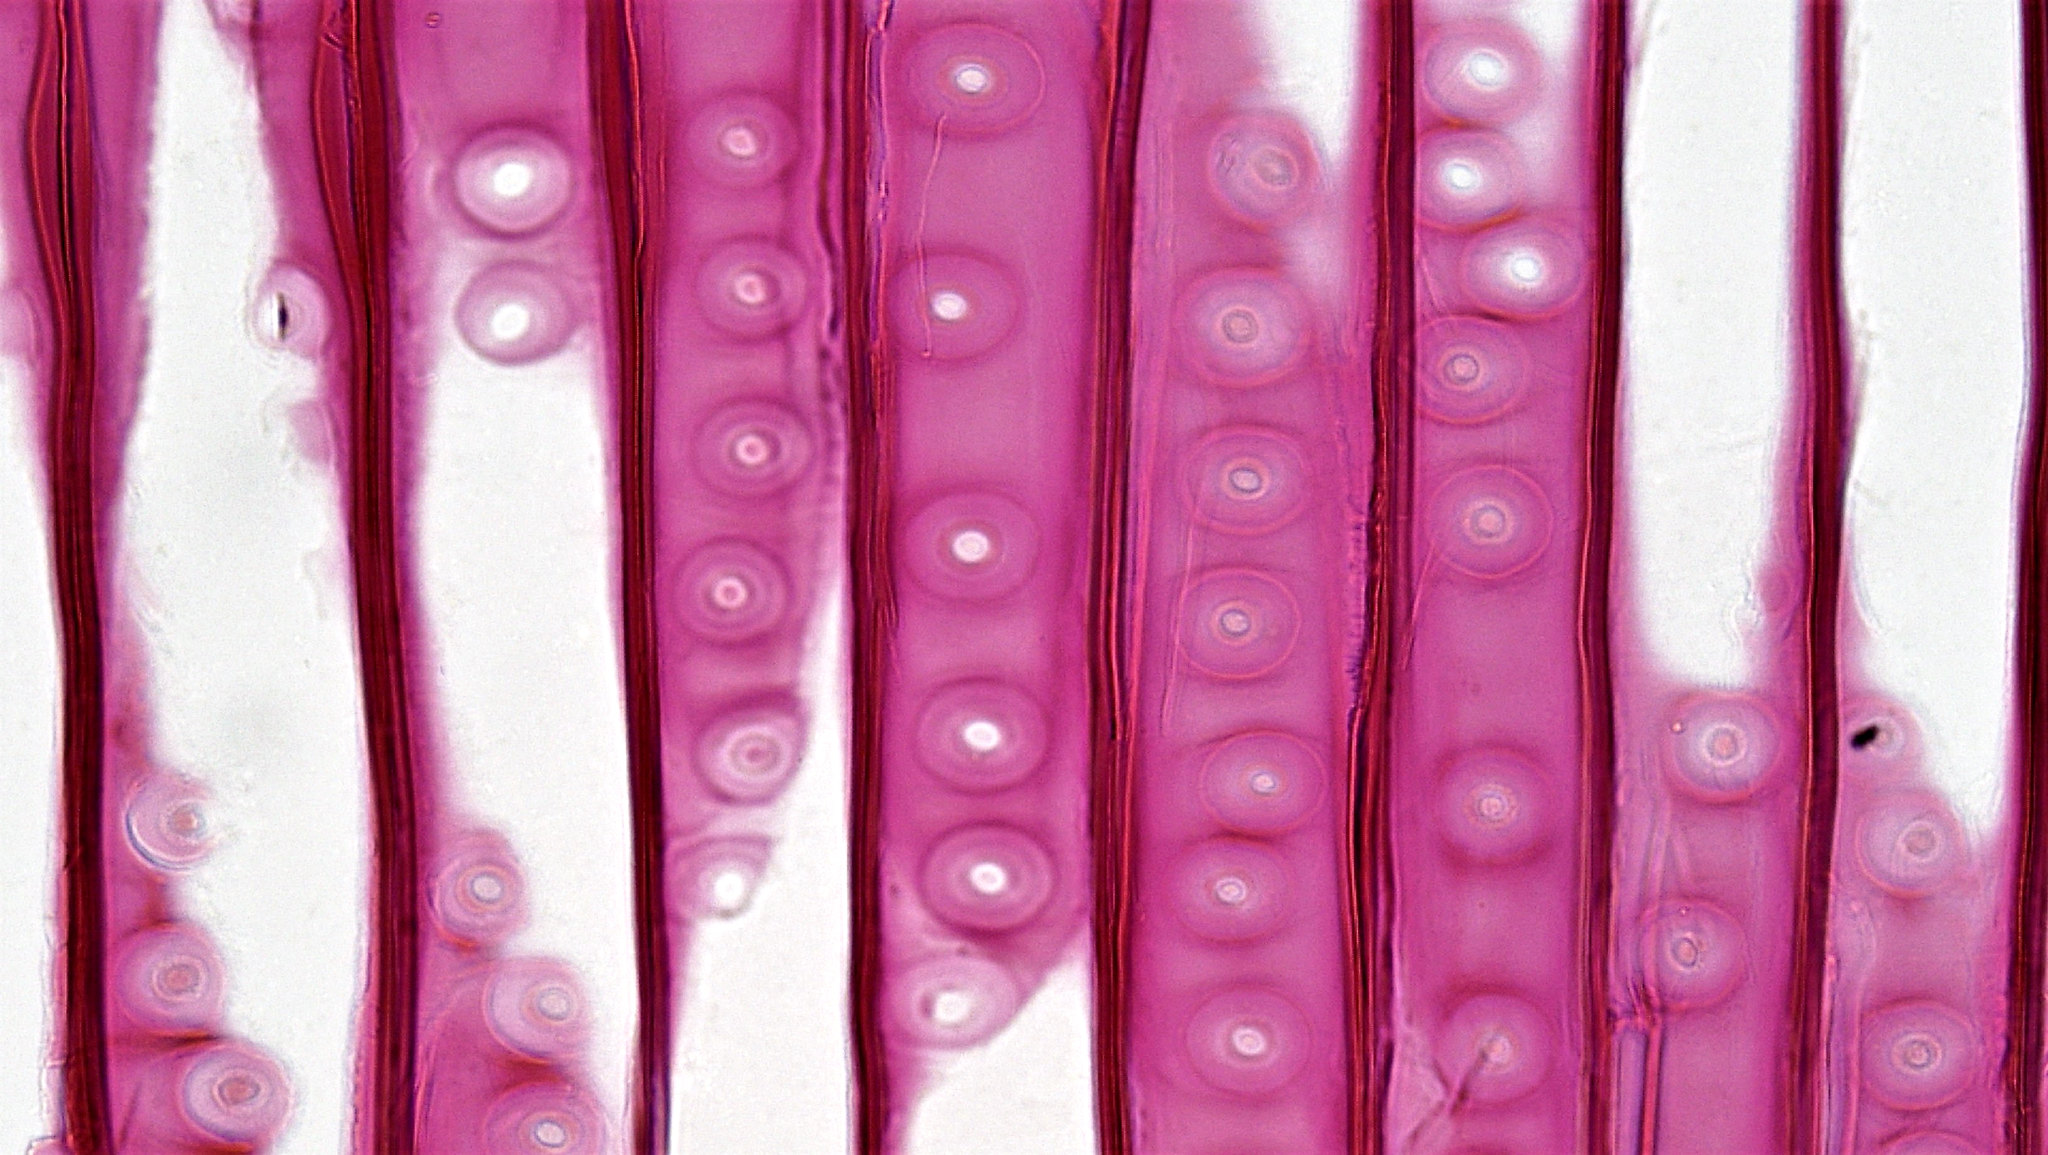 Tracheids appear as pink columns. Pit pairs look like stacks of bulls eyes along each tracheid.